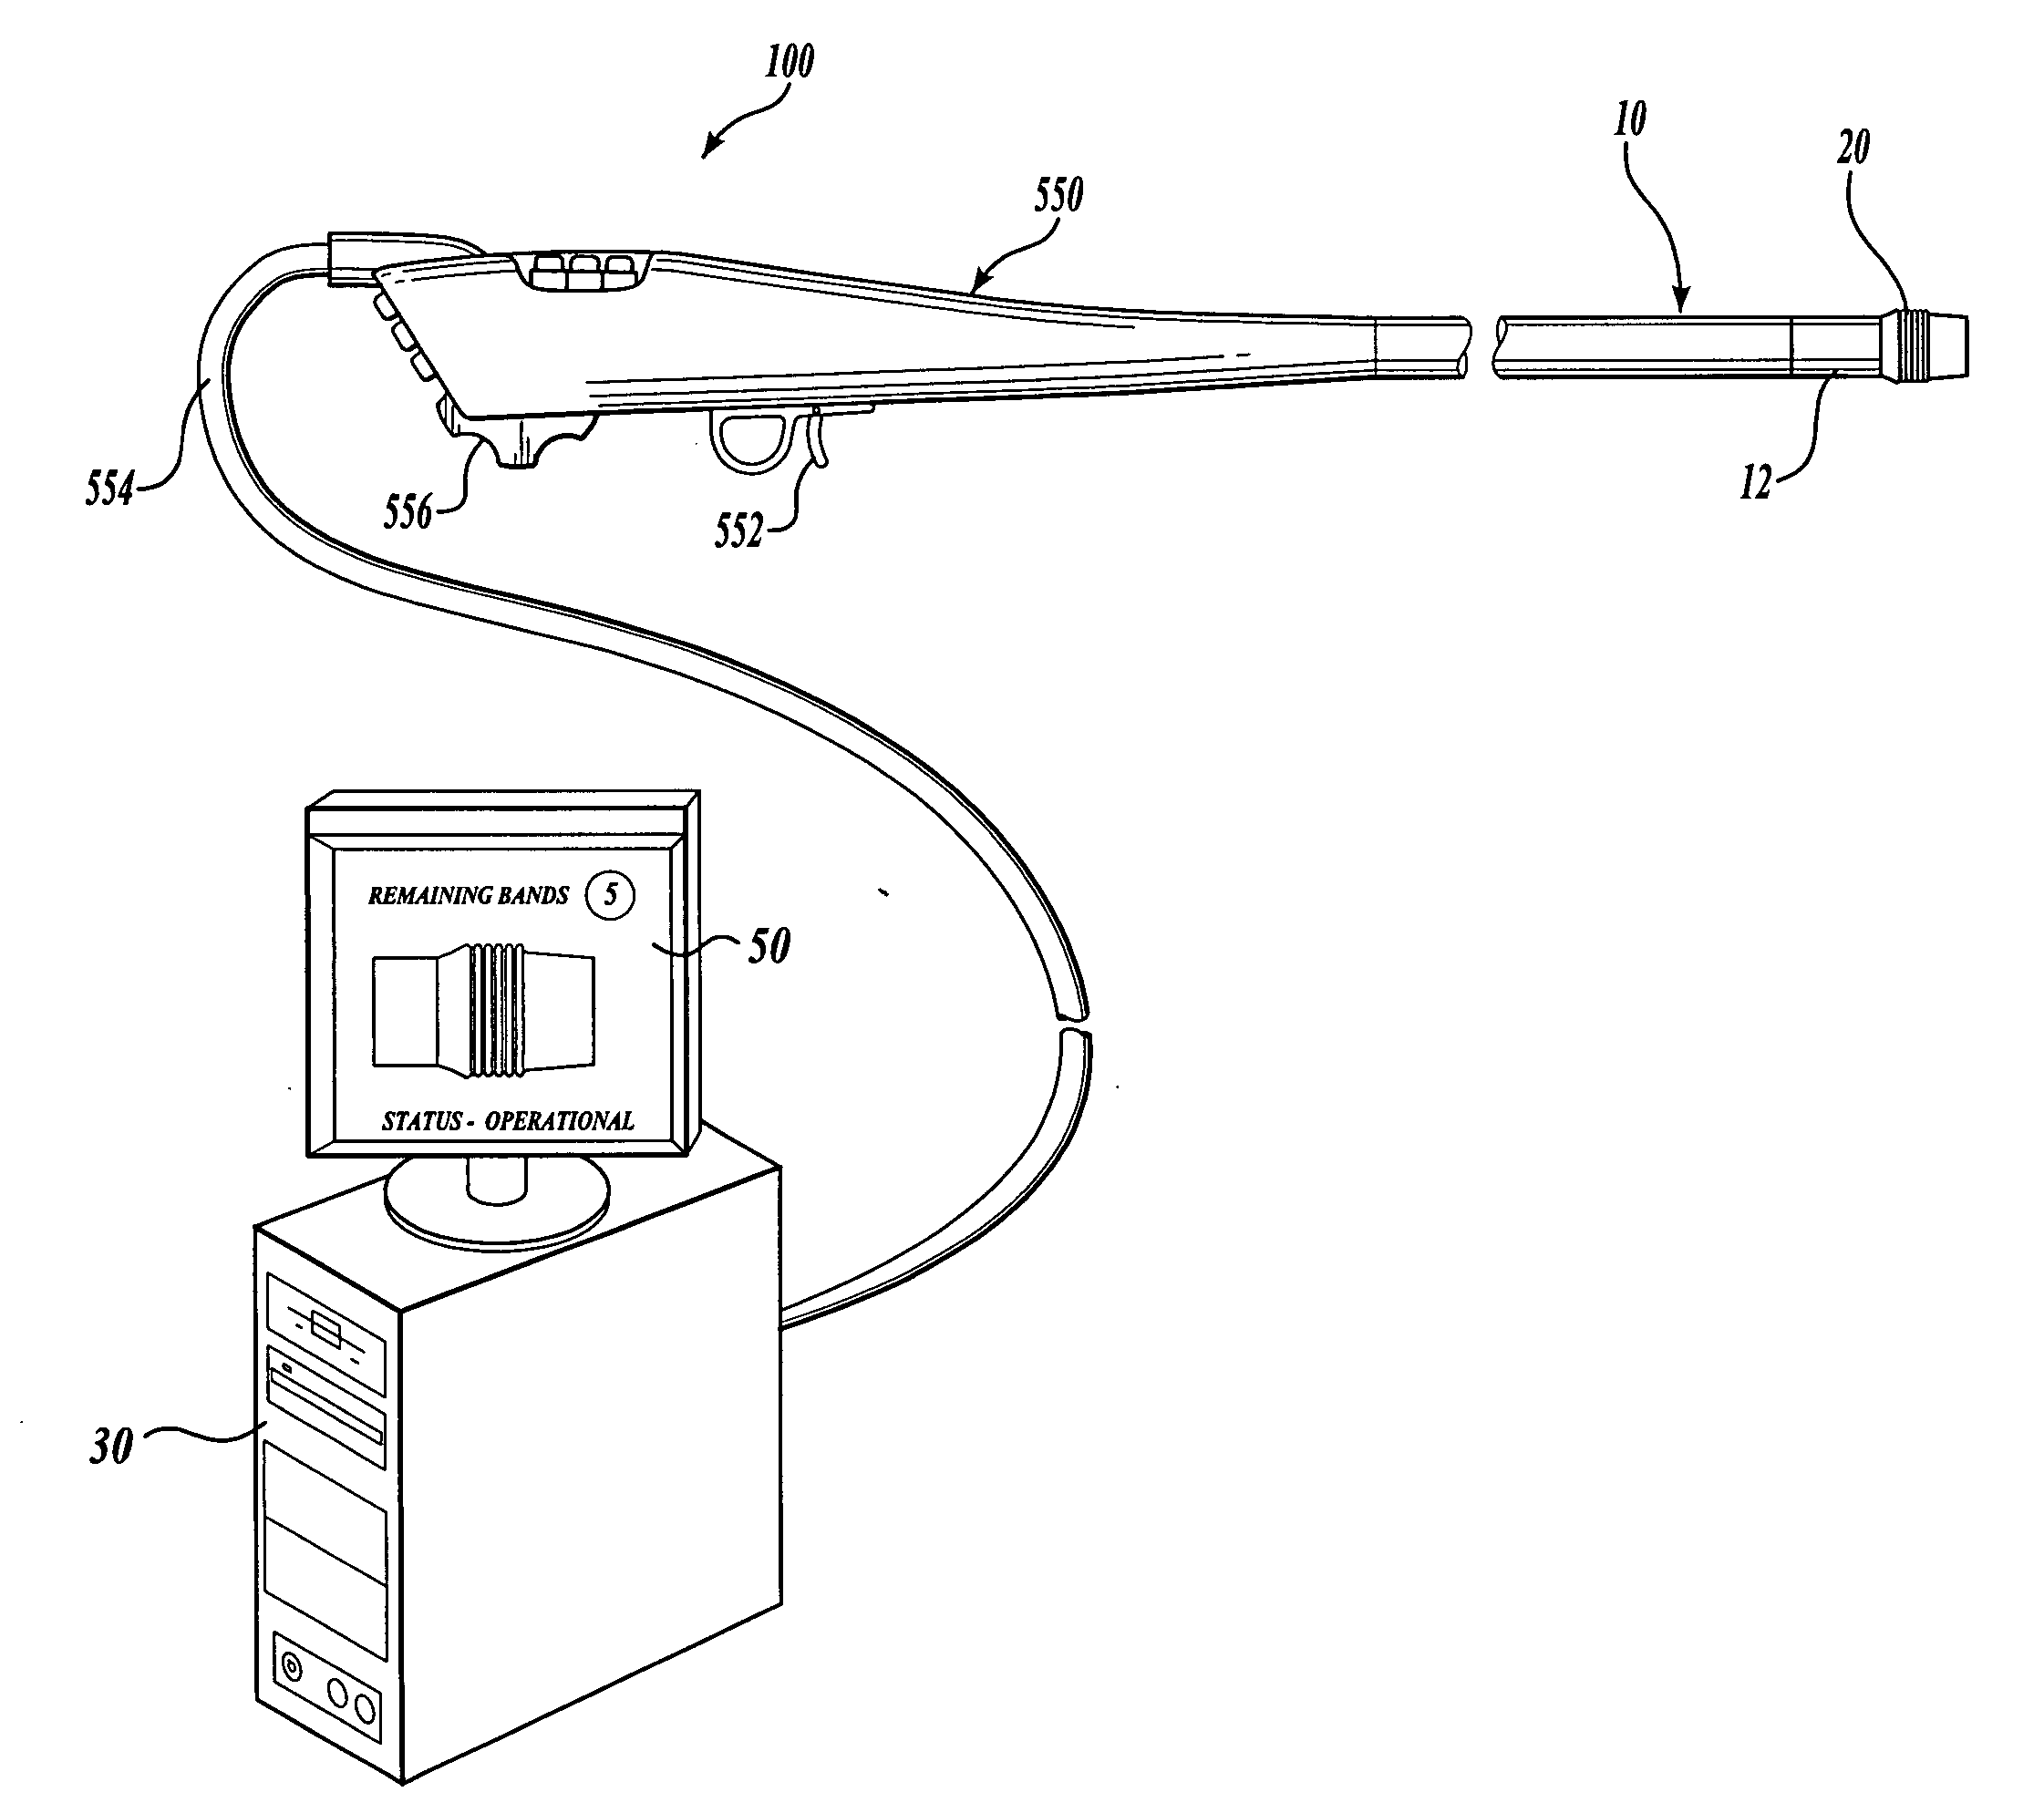 Endoscopic apparatus with integrated variceal ligation device